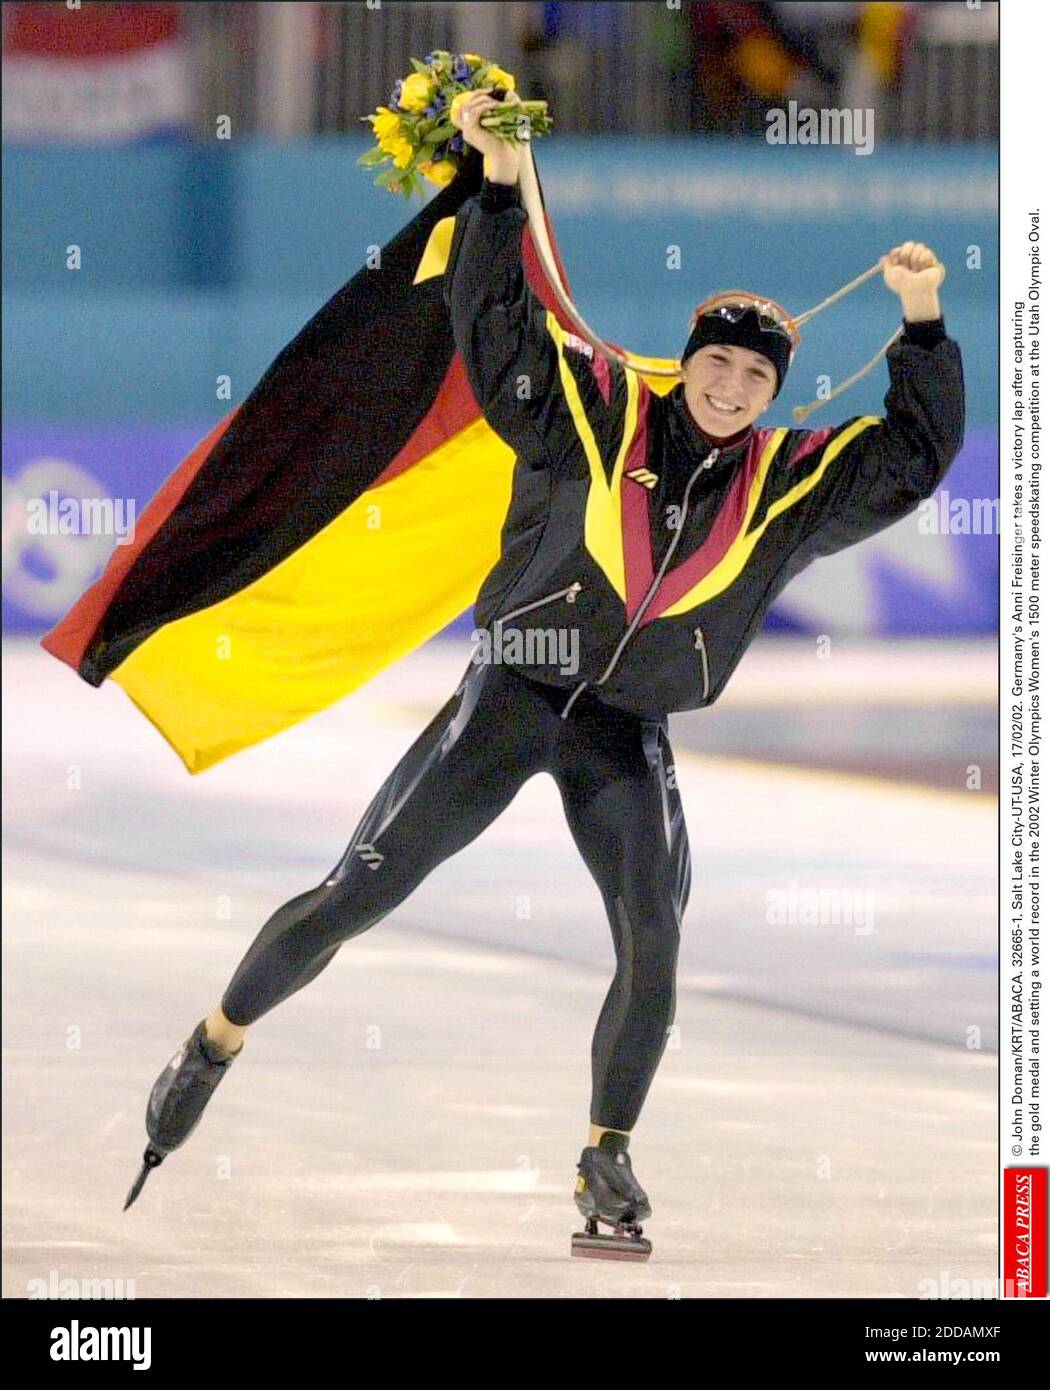 NO FILM, NO VIDEO, NO TV, NO DOCUMENTARY - © John Doman/KRT/ABACA. 32665-1. Salt Lake City-UT-USA, 17/02/02. Germany's Anni Freisinger takes a victory lap after capturing the gold medal and setting a world record in the 2002 Winter Olympics Women's 1500 meter speedskating competition at the Utah O Stock Photo